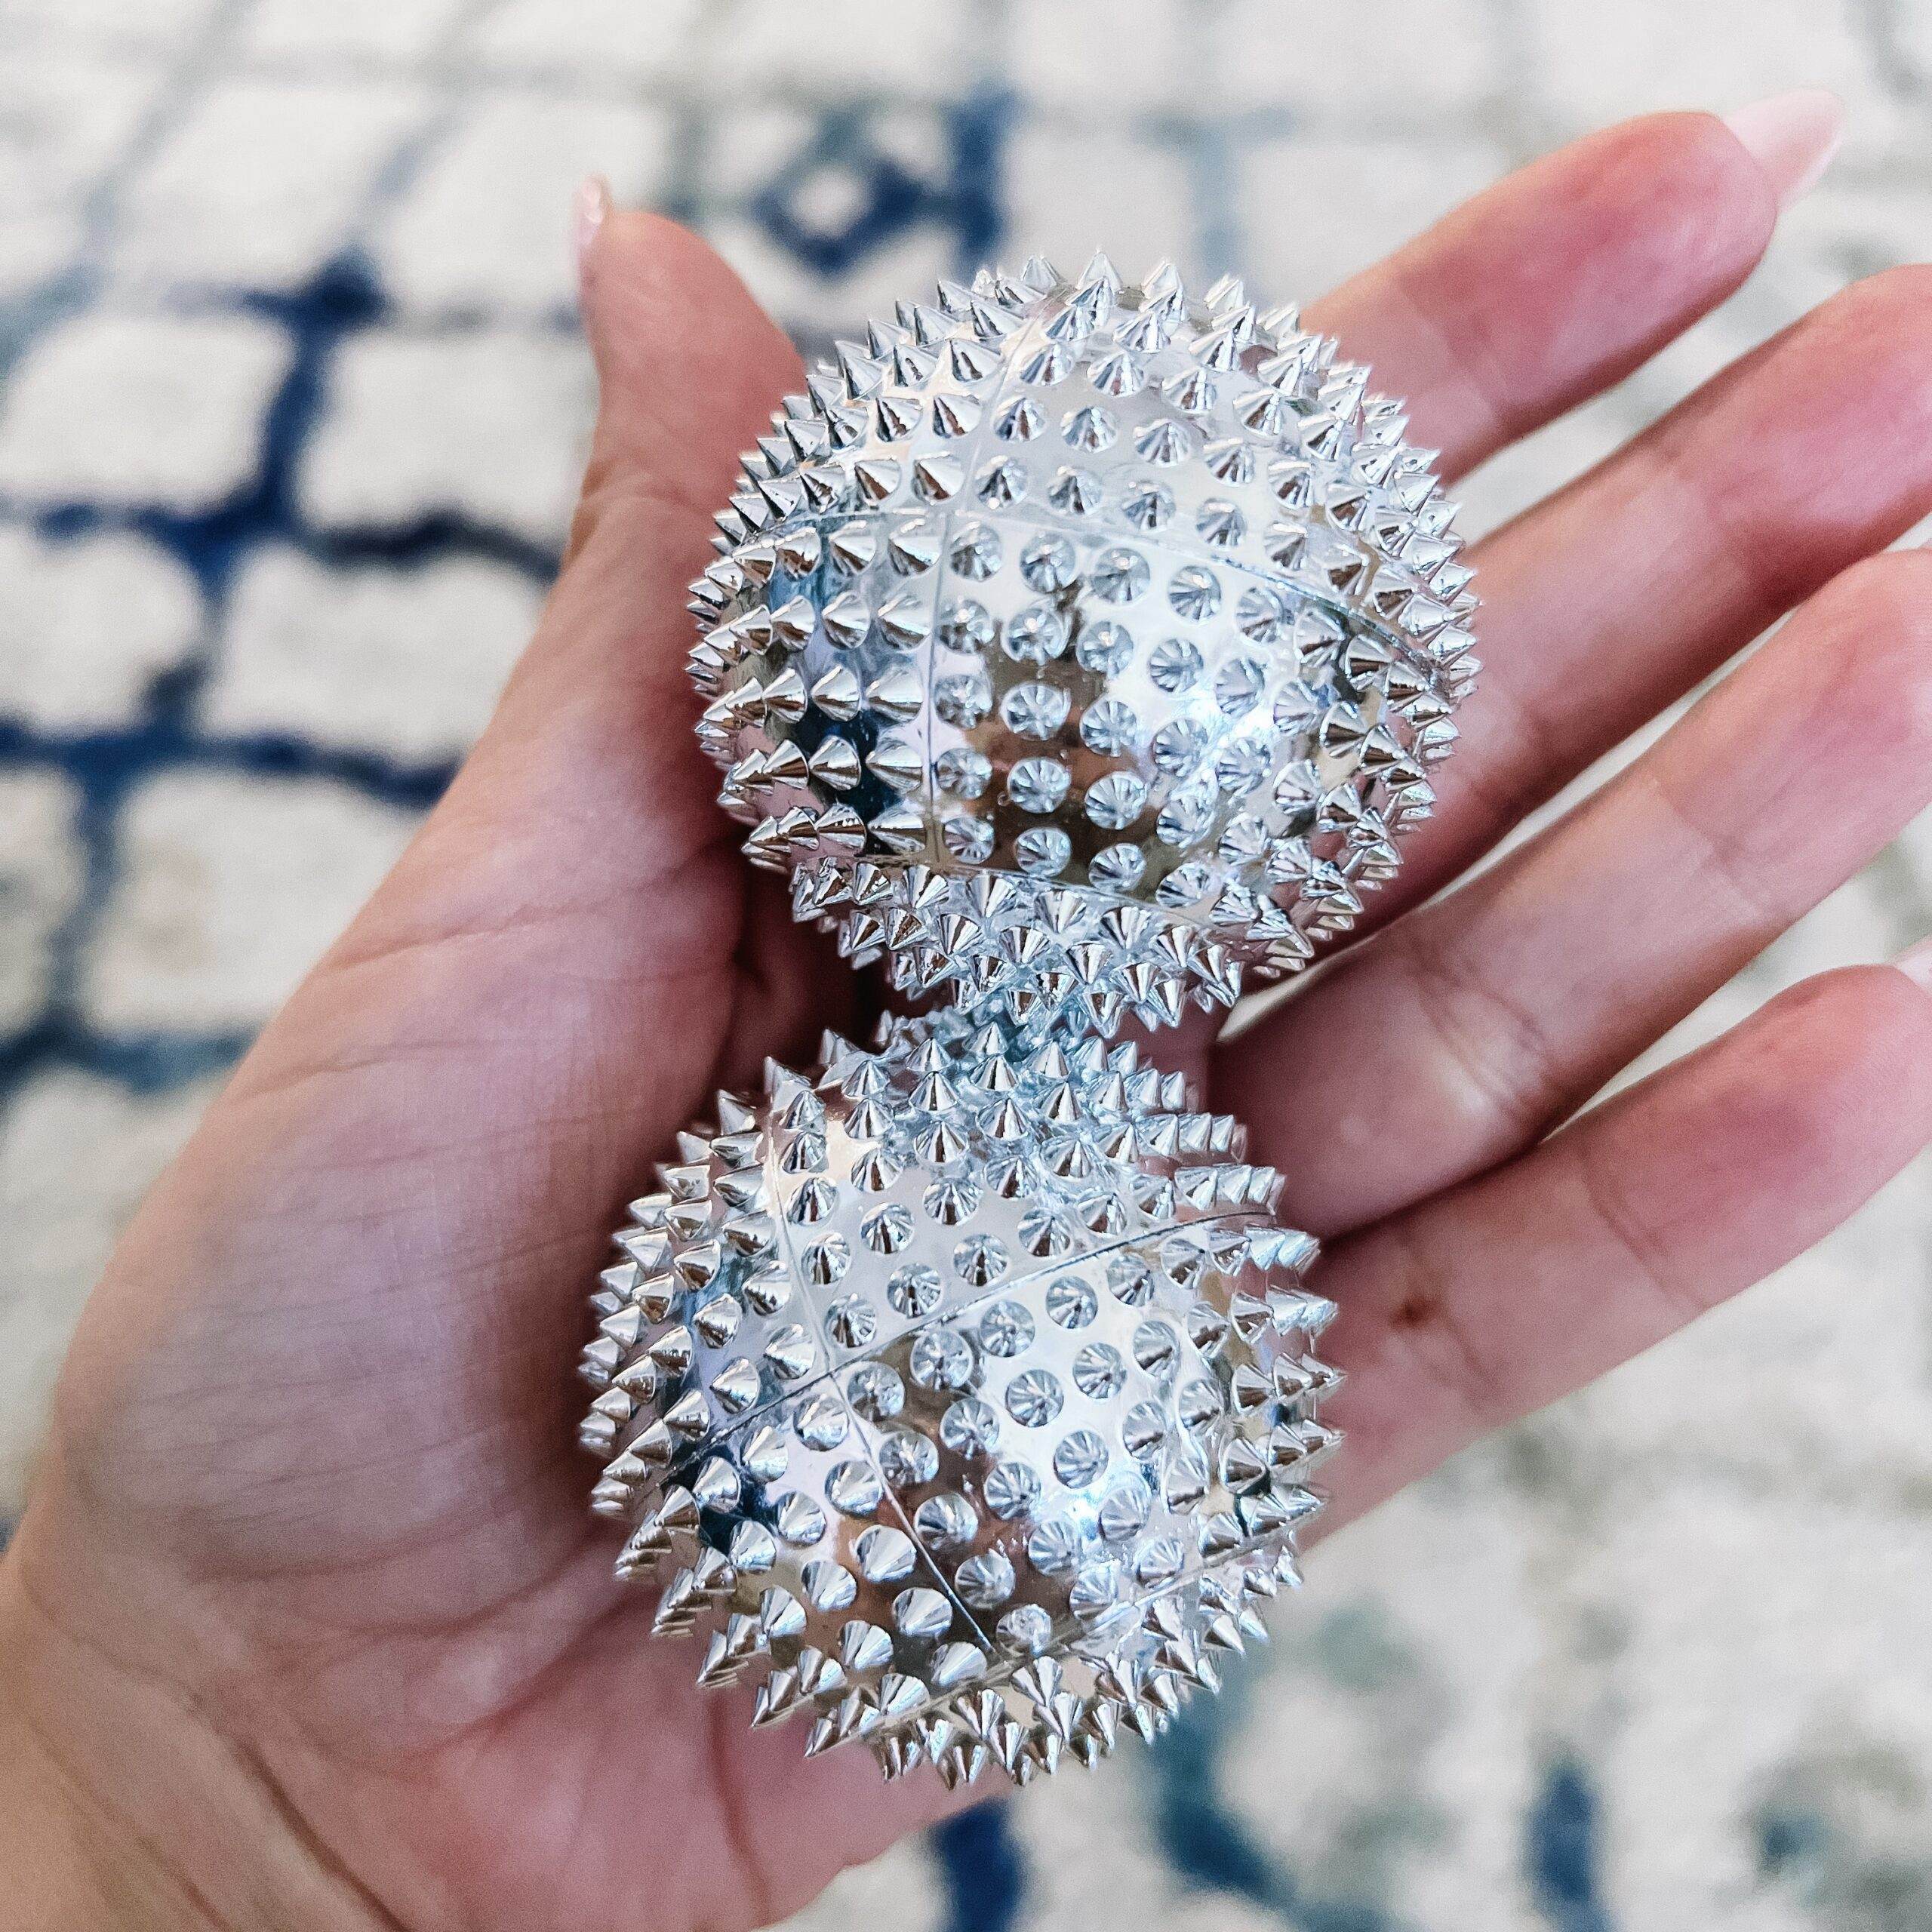 Spikey Magnetic Balls for Coping